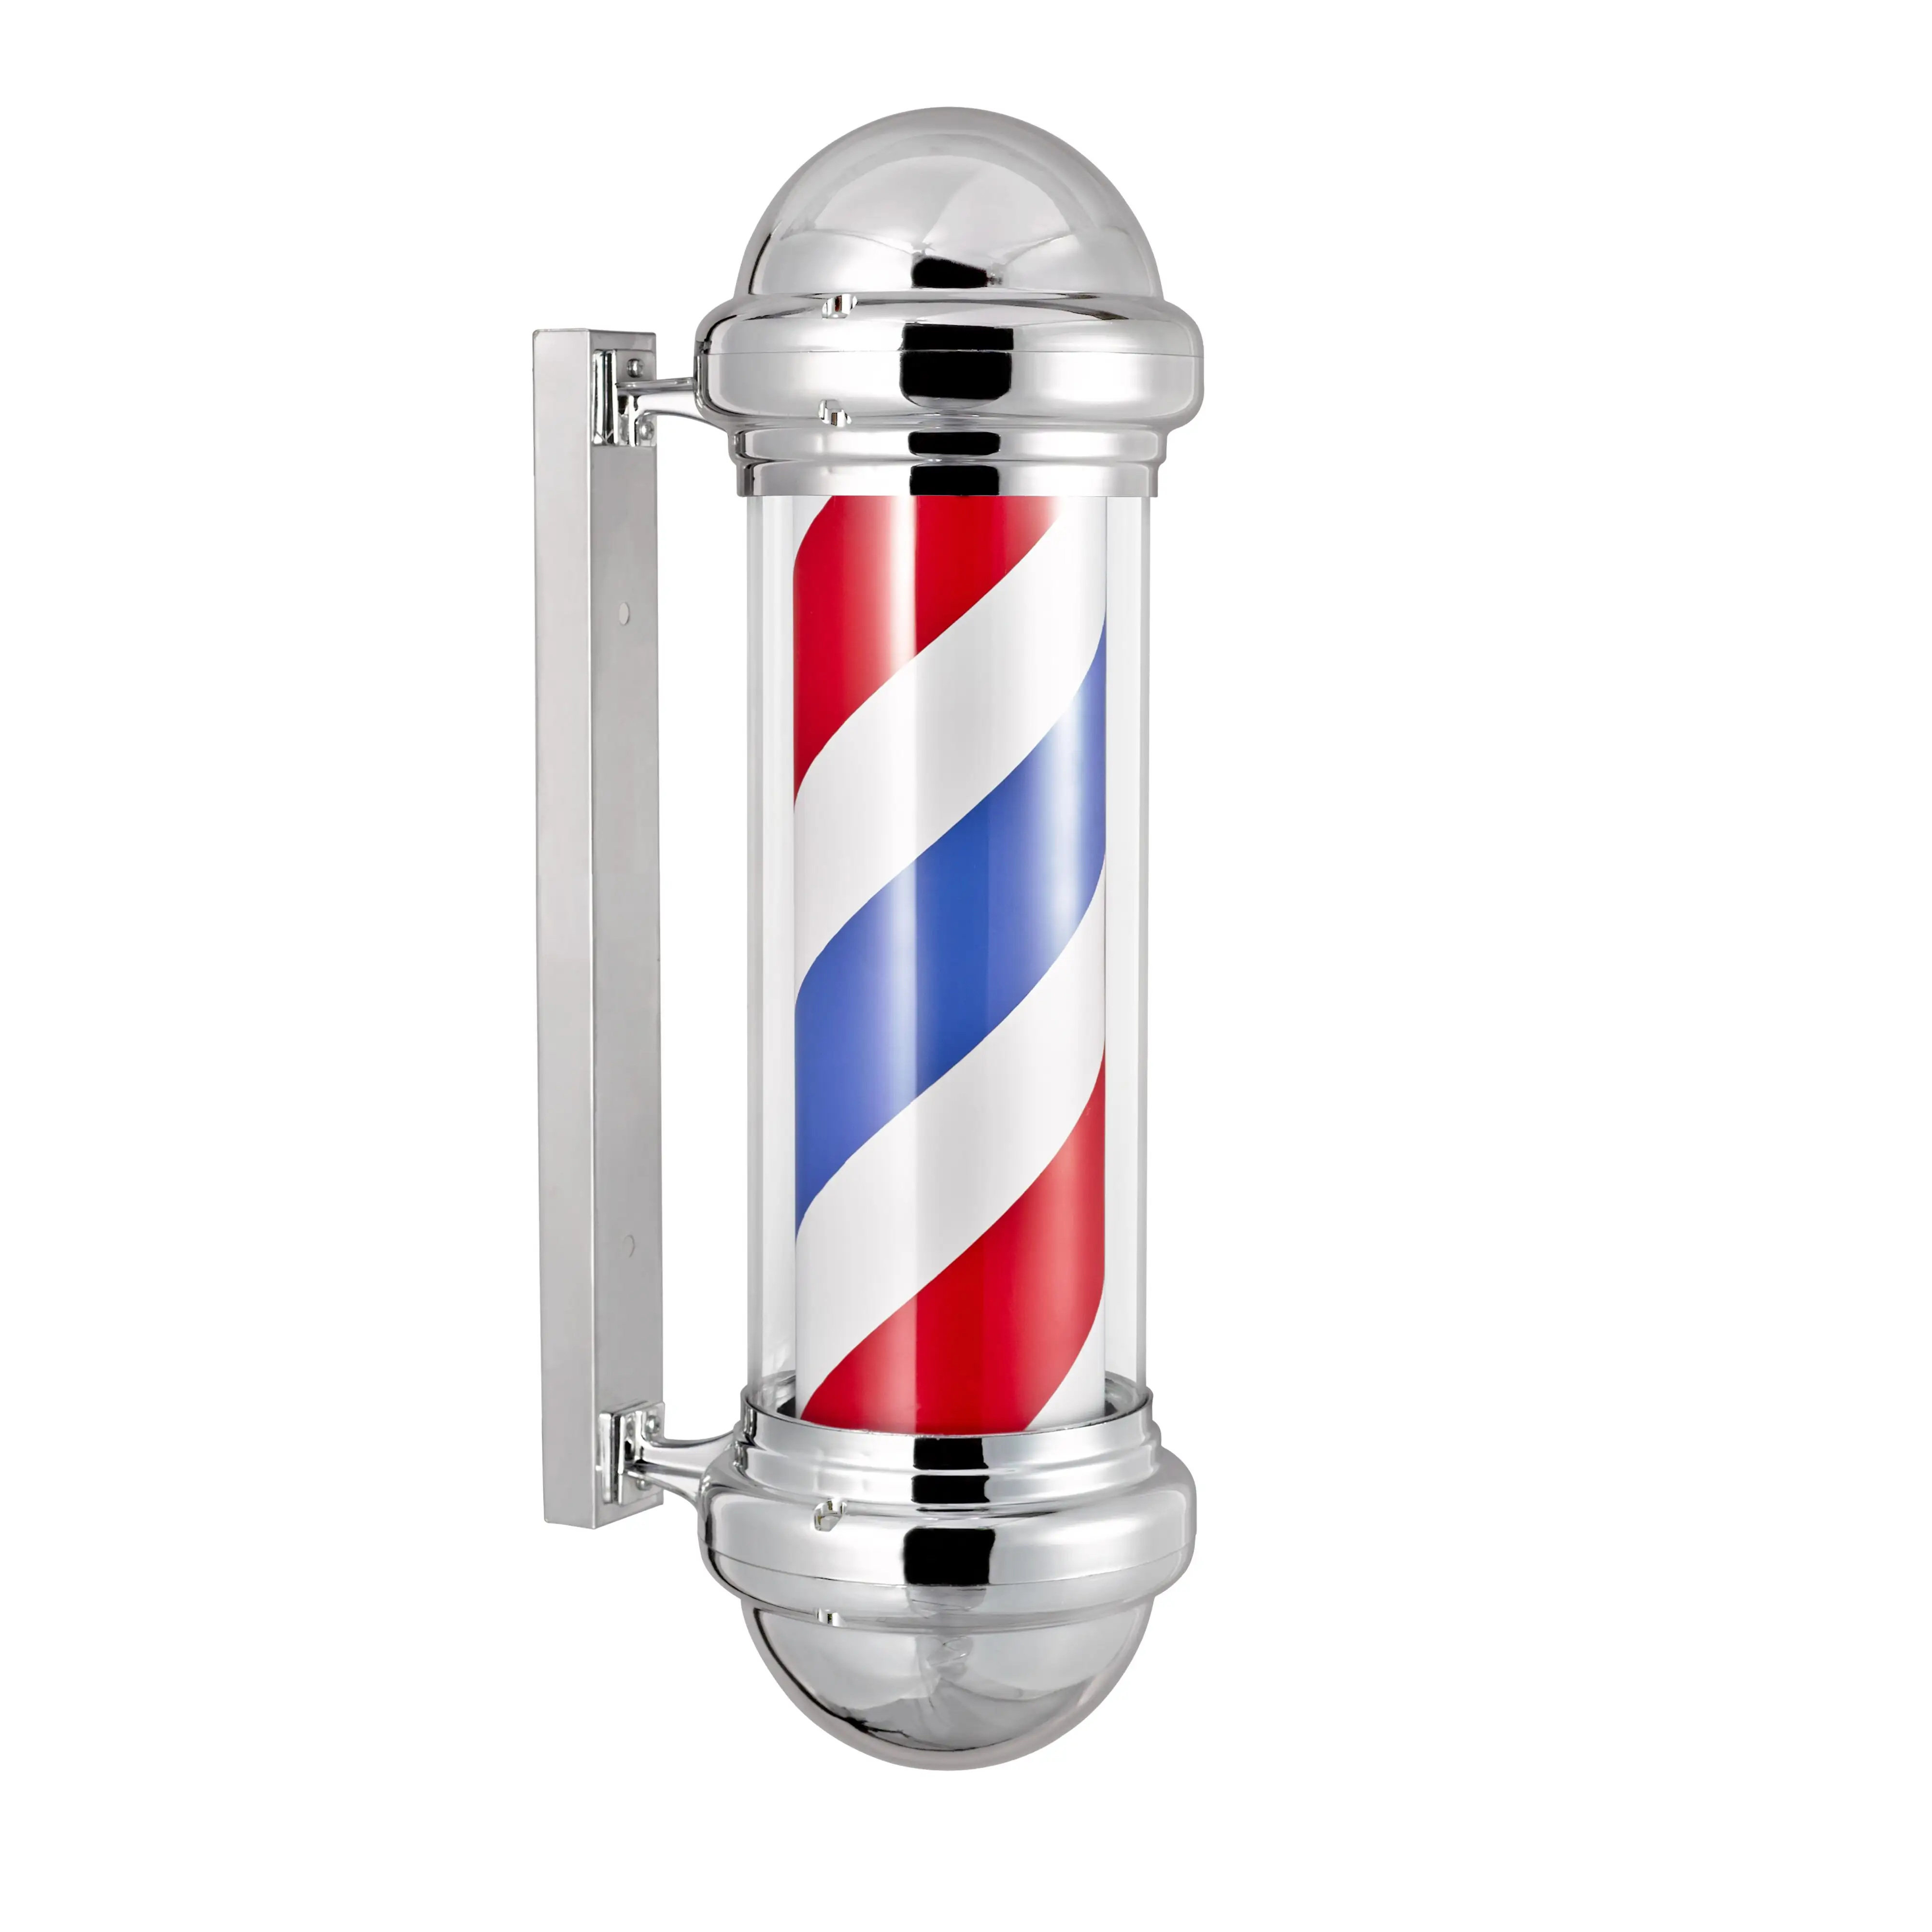 Hot sale LED WaterProof Glowing Globe Light Red White Blue Barber Shop Pole Other Plastic Furniture